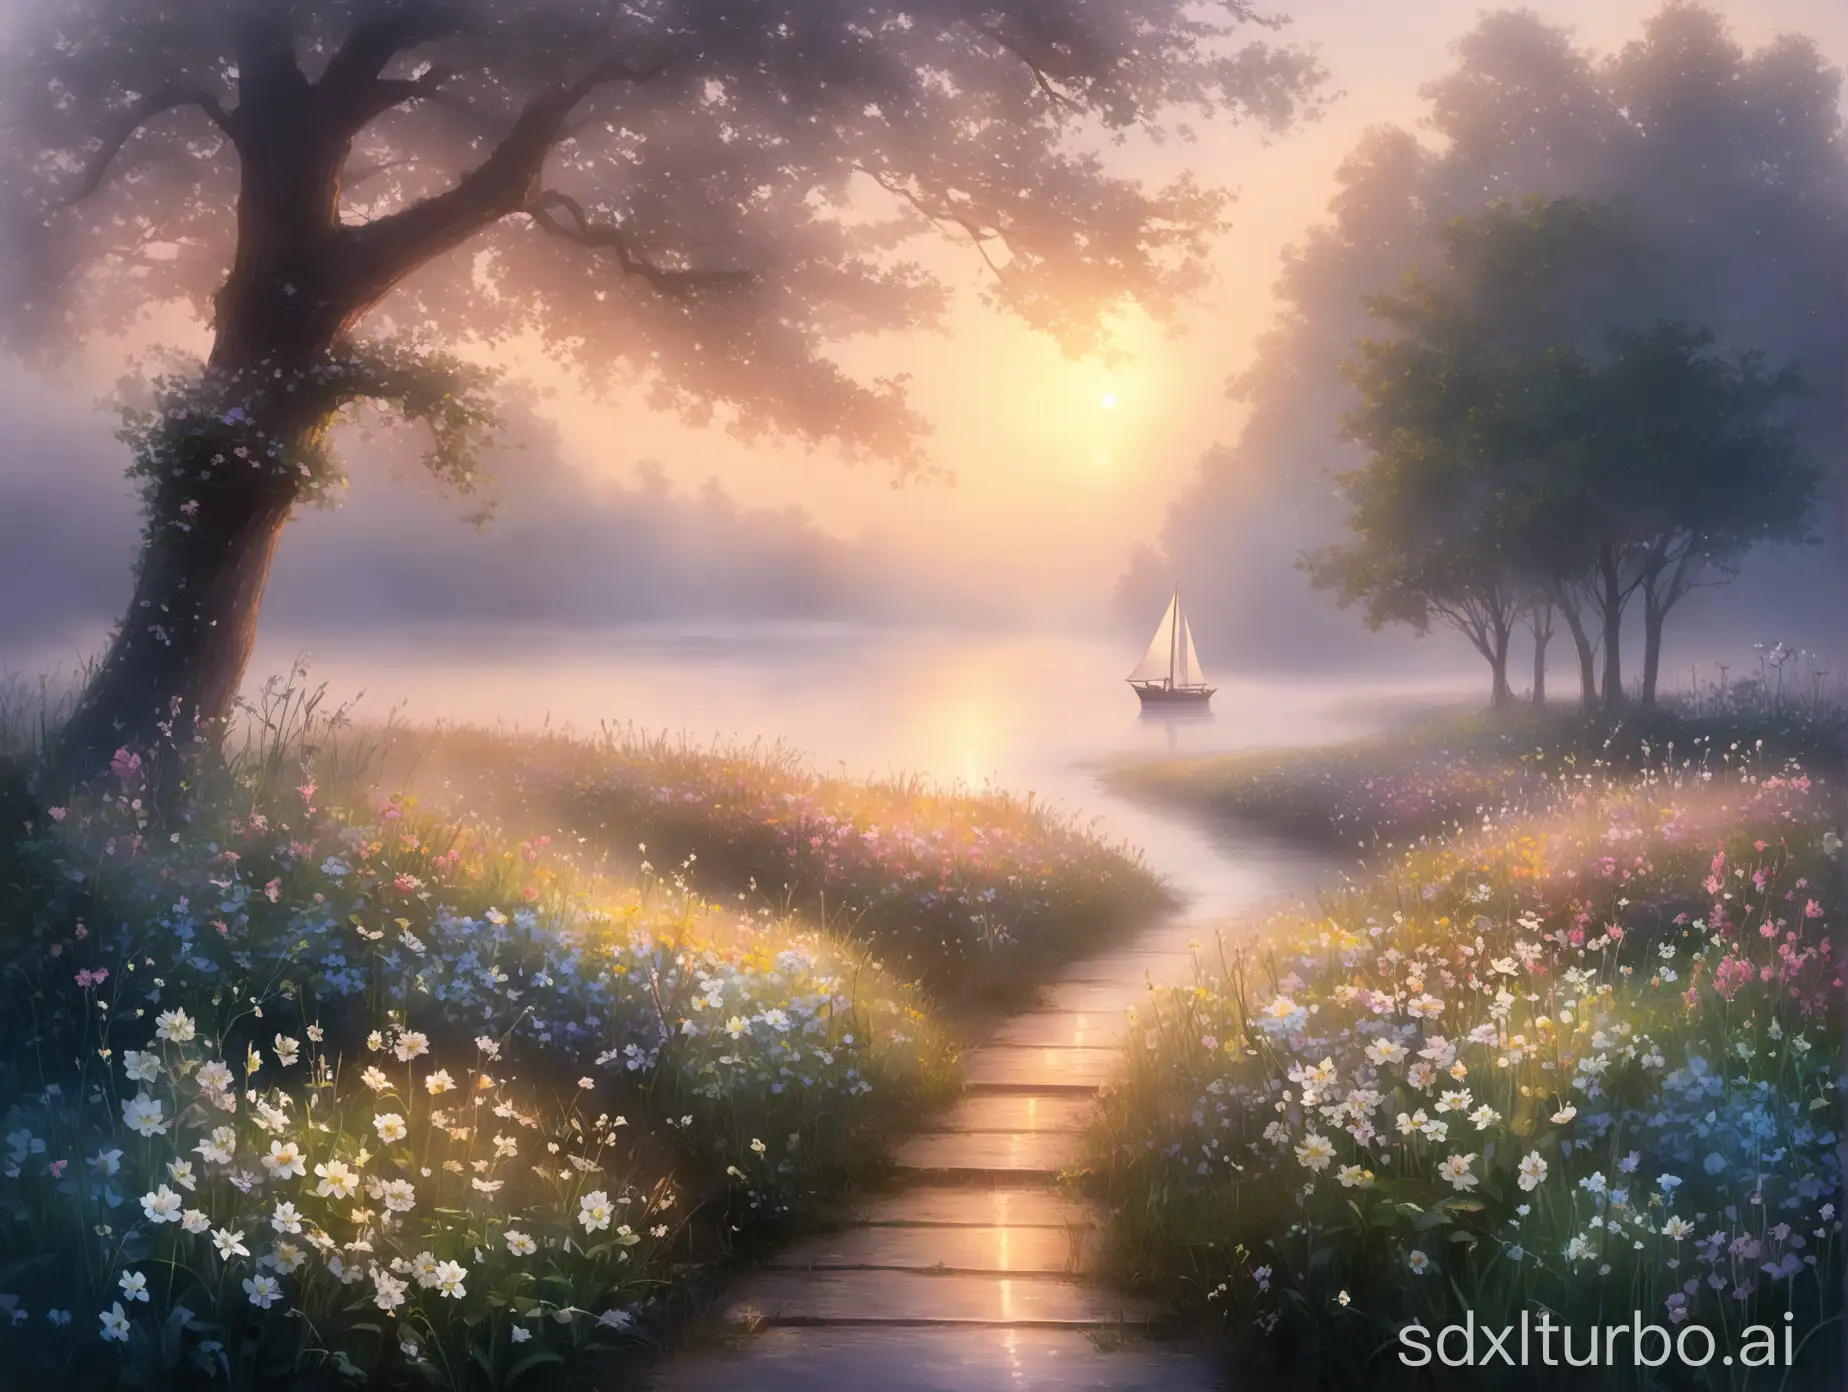 Mist gently strokes the journey, dawn lights up hope; Heartbeats follow the dance steps of the wind, song wakes up the fragrance of flowers; Every breath is a new set sail, Adventure unfolds unintentionally, quietly blooming.